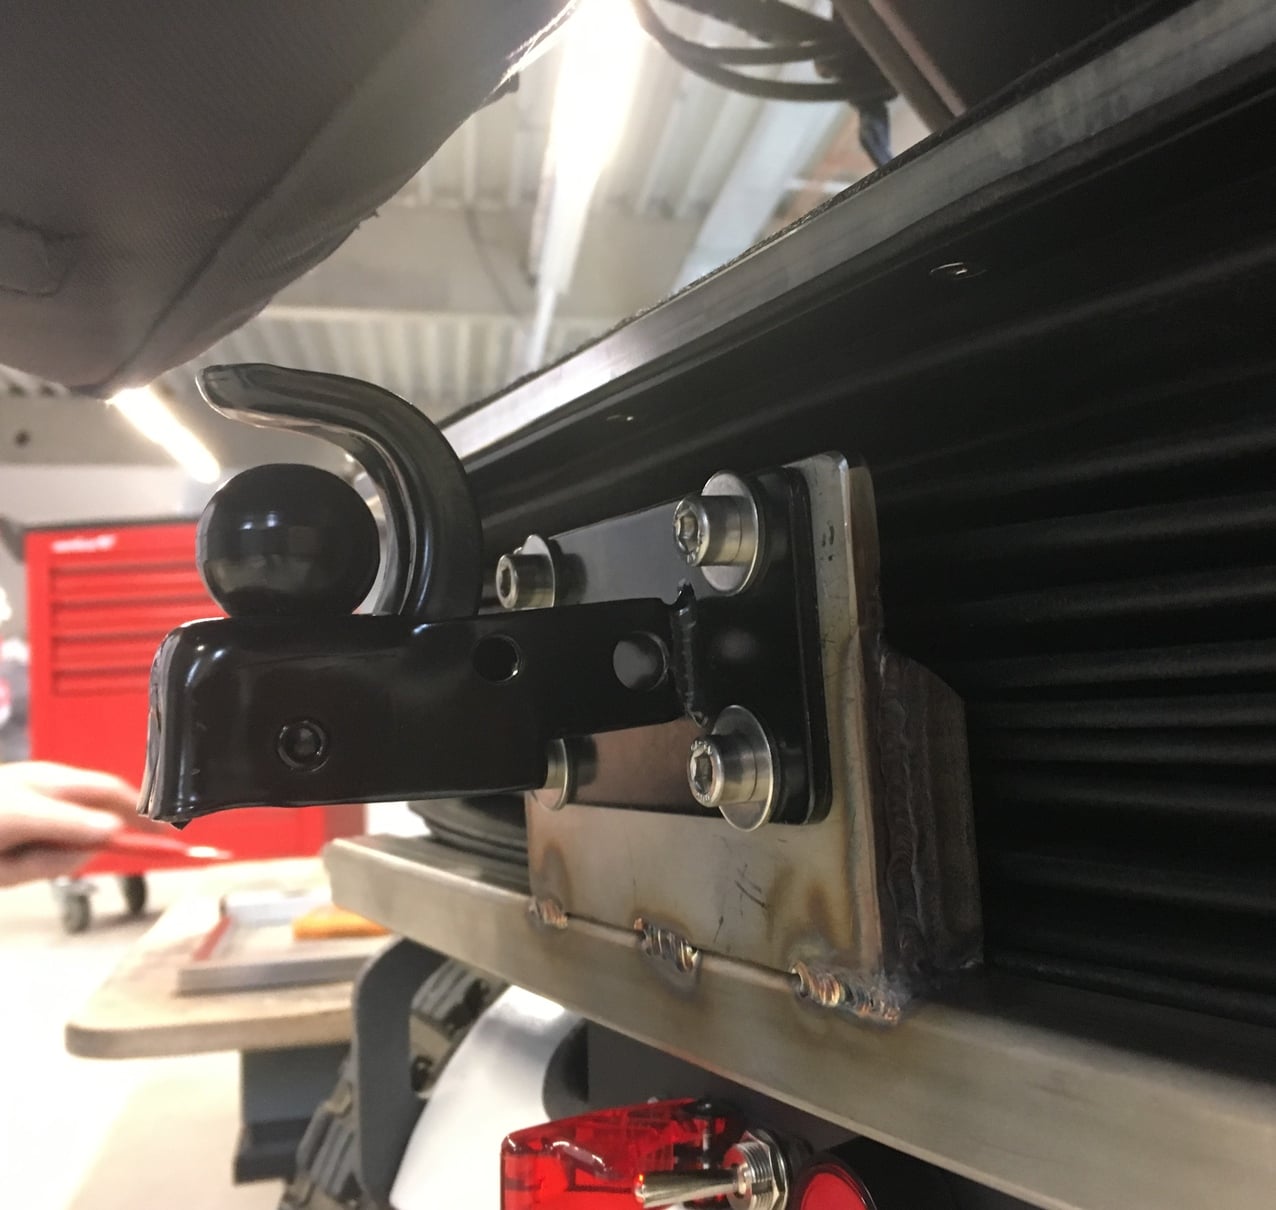 Mounting the running board trailer on the electric vehicle